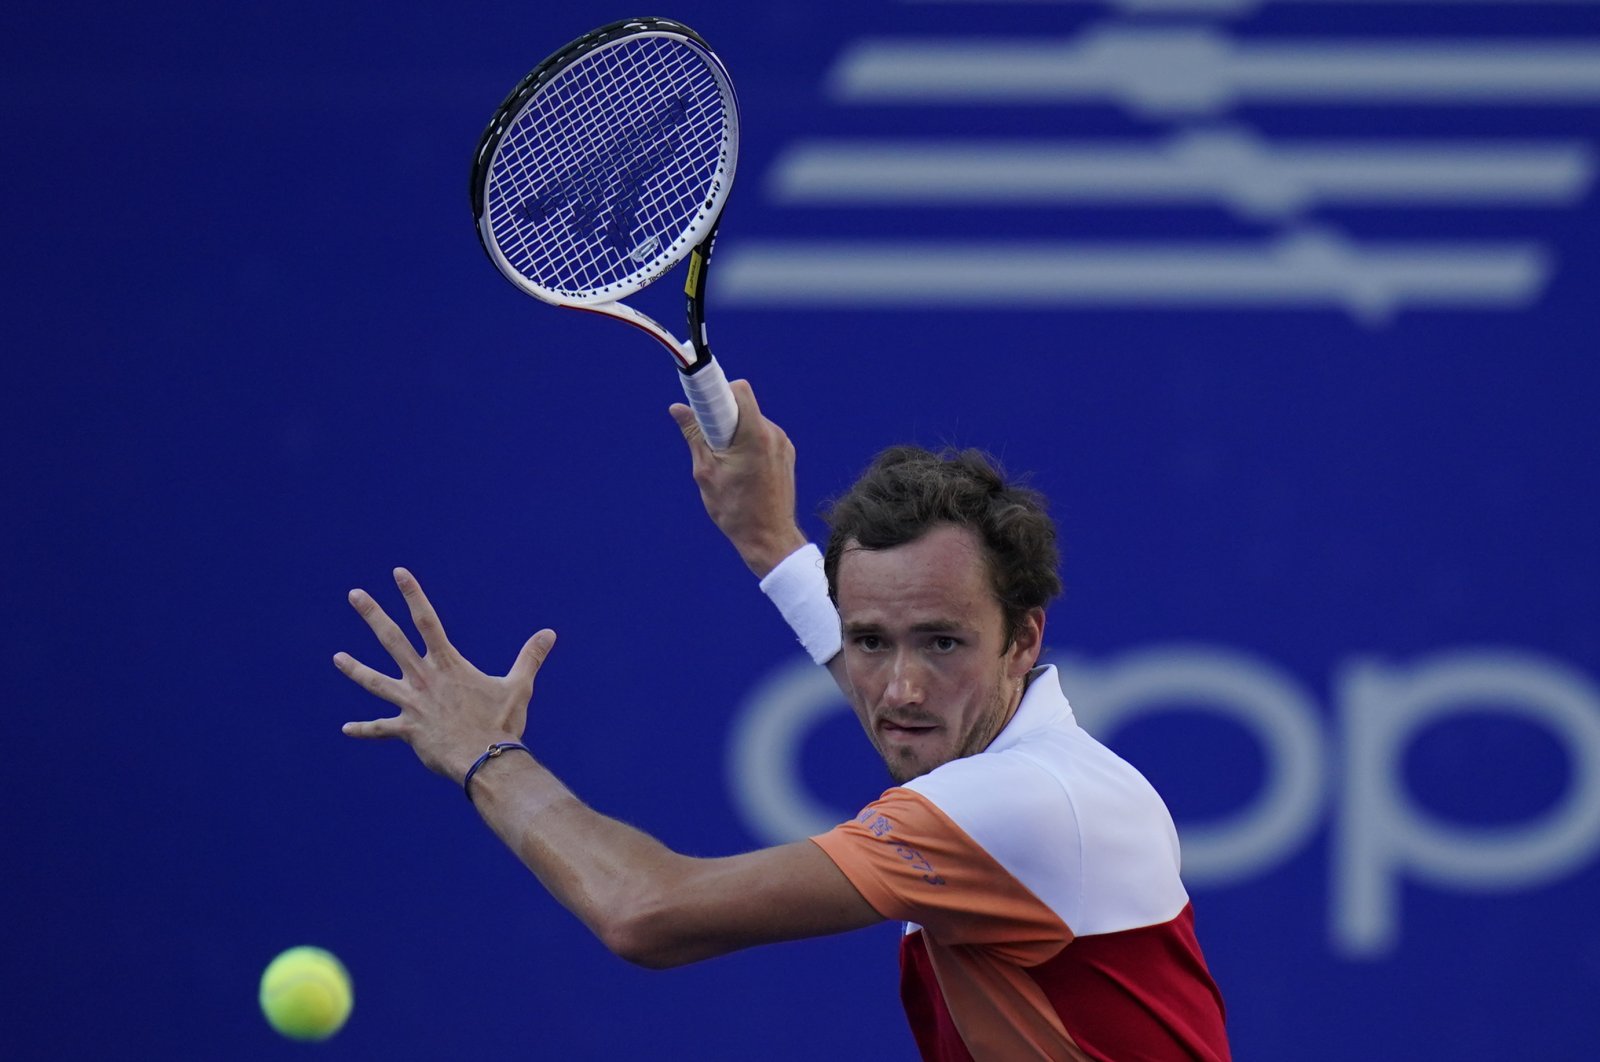 Daniil Medvedev returns a ball during a match against Yoshihito Nishioka at the quarterfinal at the Mexican Open tennis tournament in Acapulco, Mexico, Feb. 24, 2022. (AP Photo)